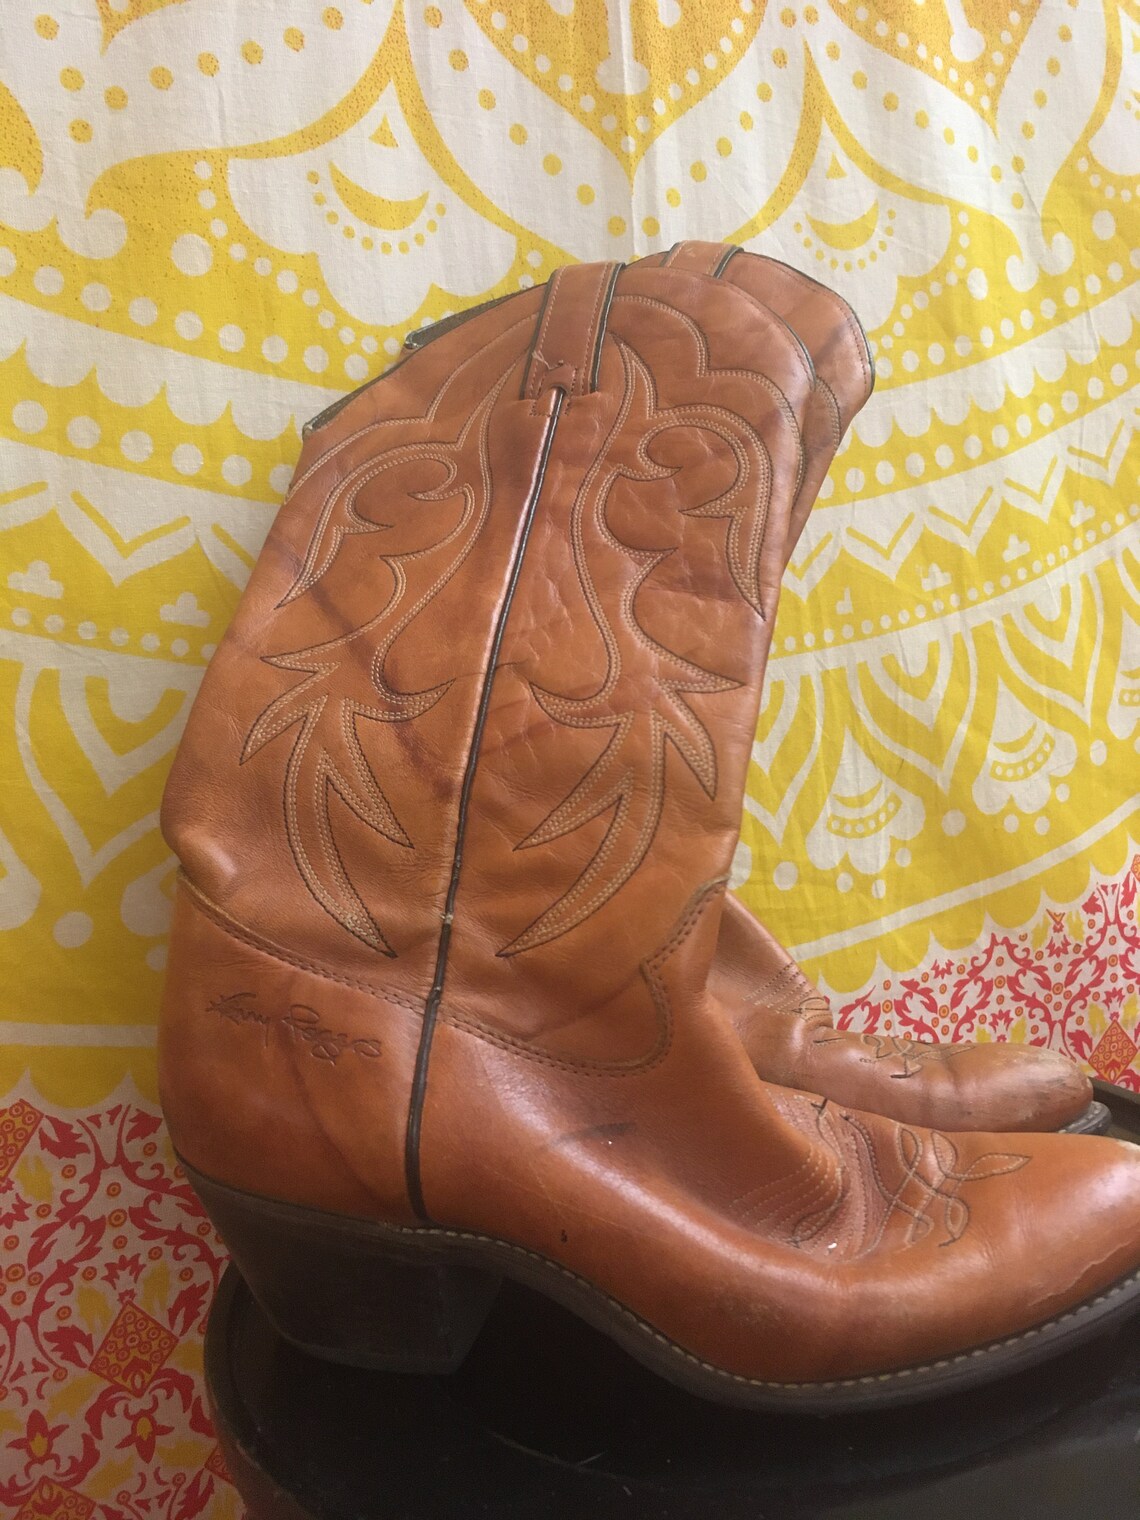 Kenny Rogers Cow Boy Boots - Etsy